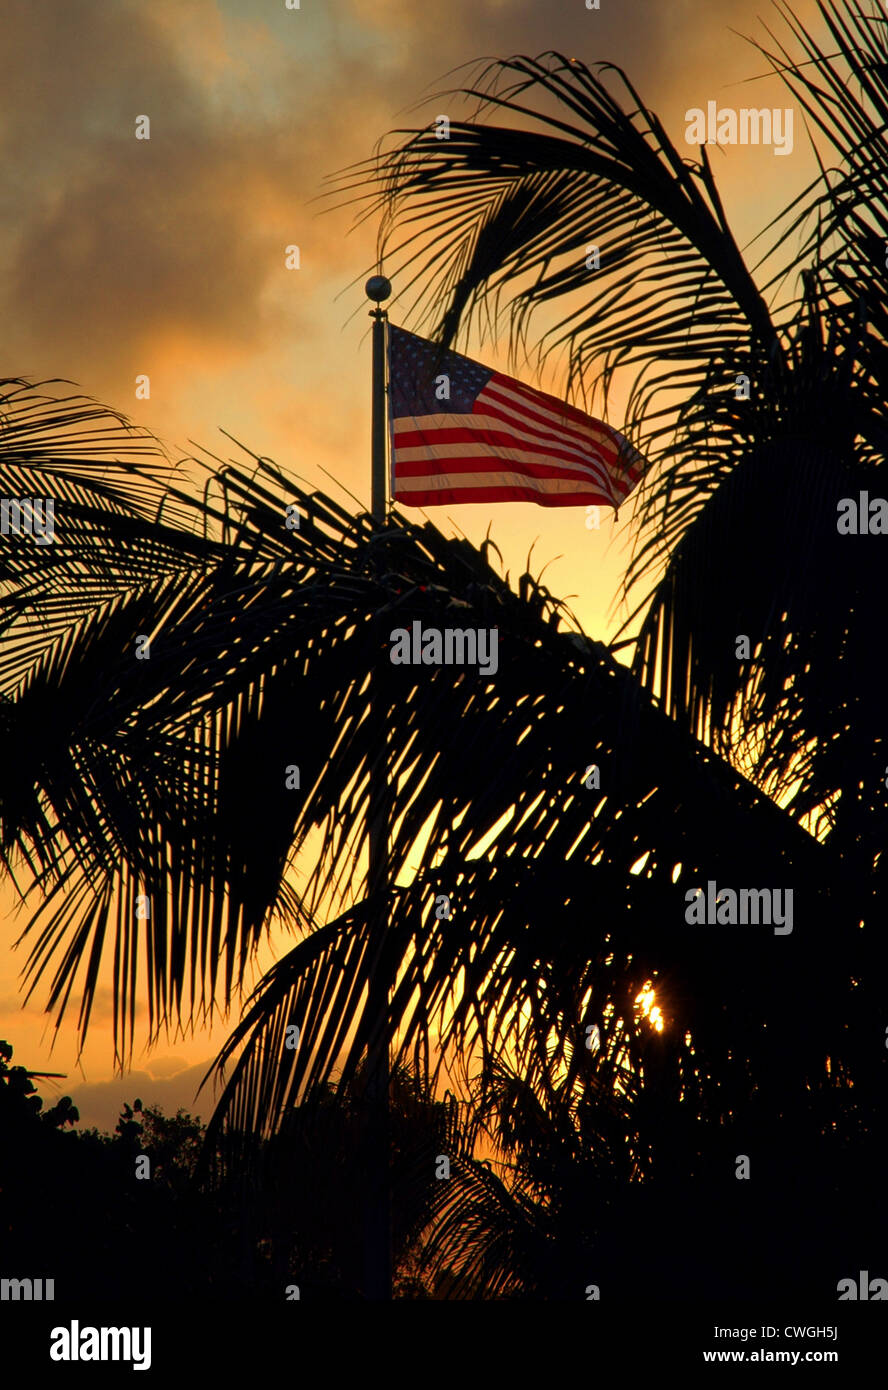 USA flag flying at sunset in Florida, USA. Stock Photo